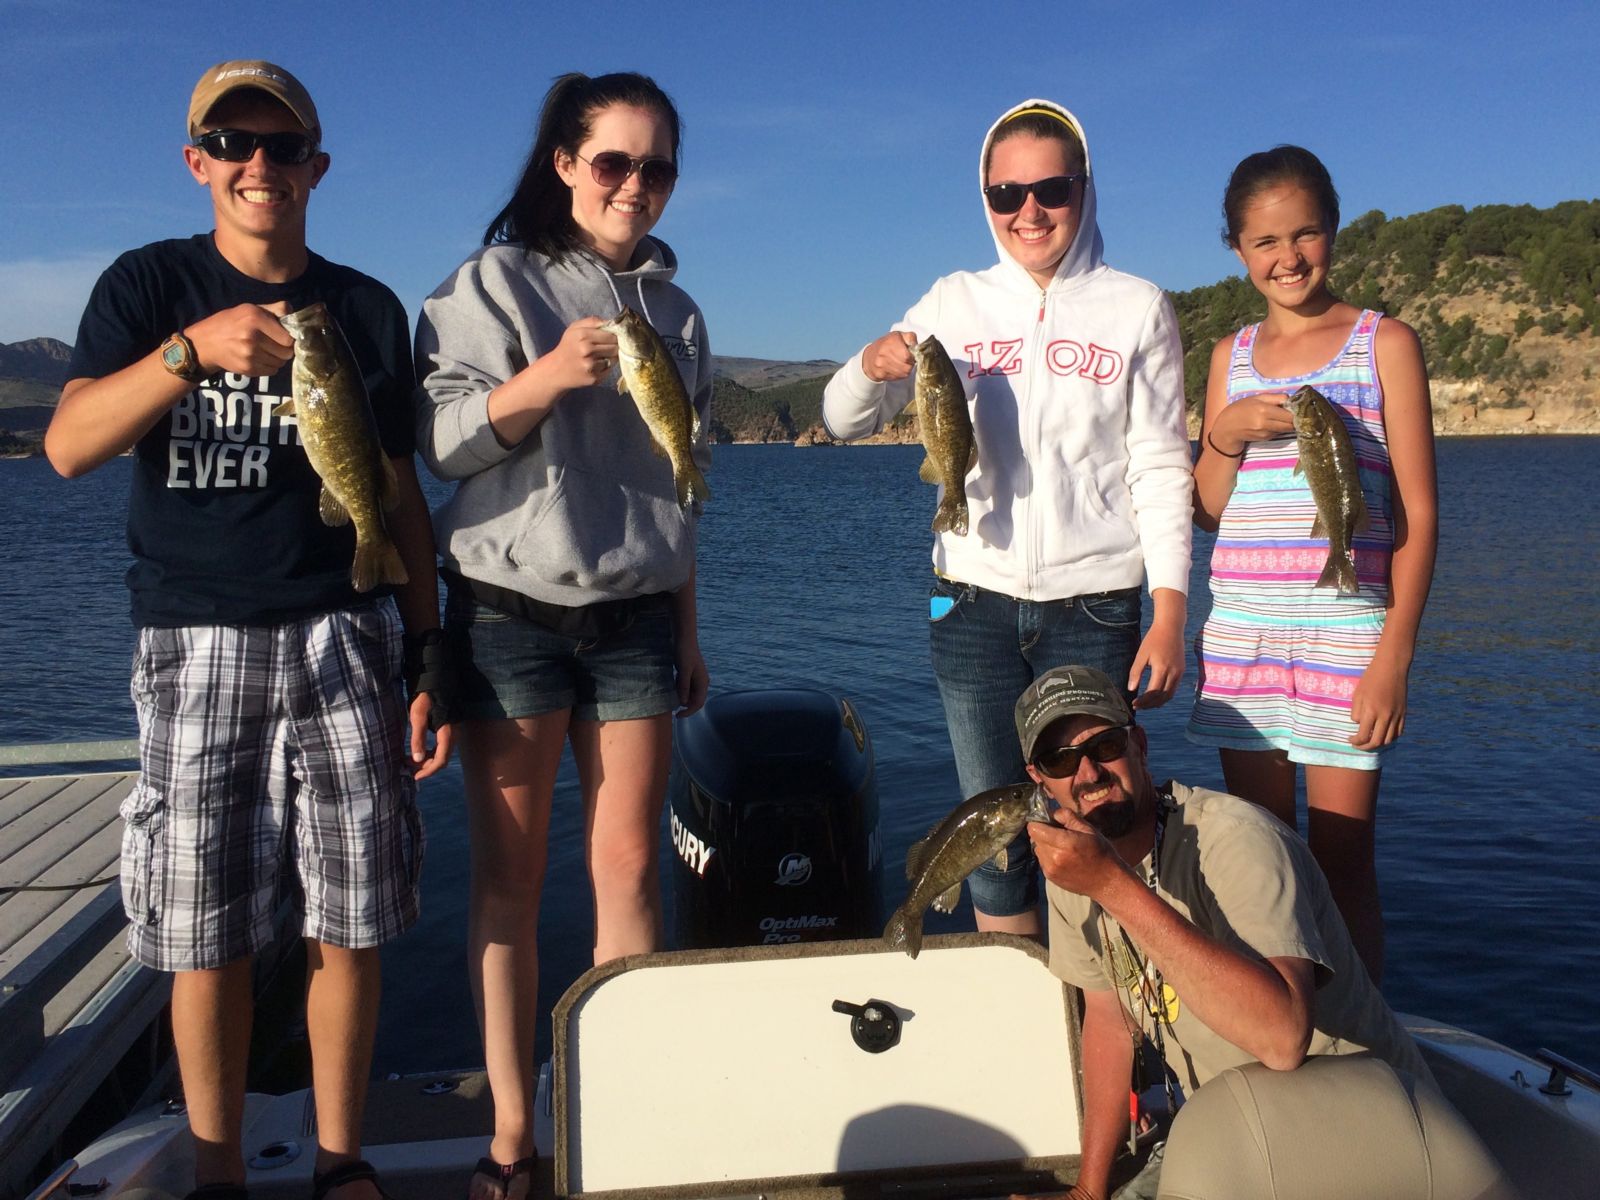 Small mouth fishing on Flaming Gorge